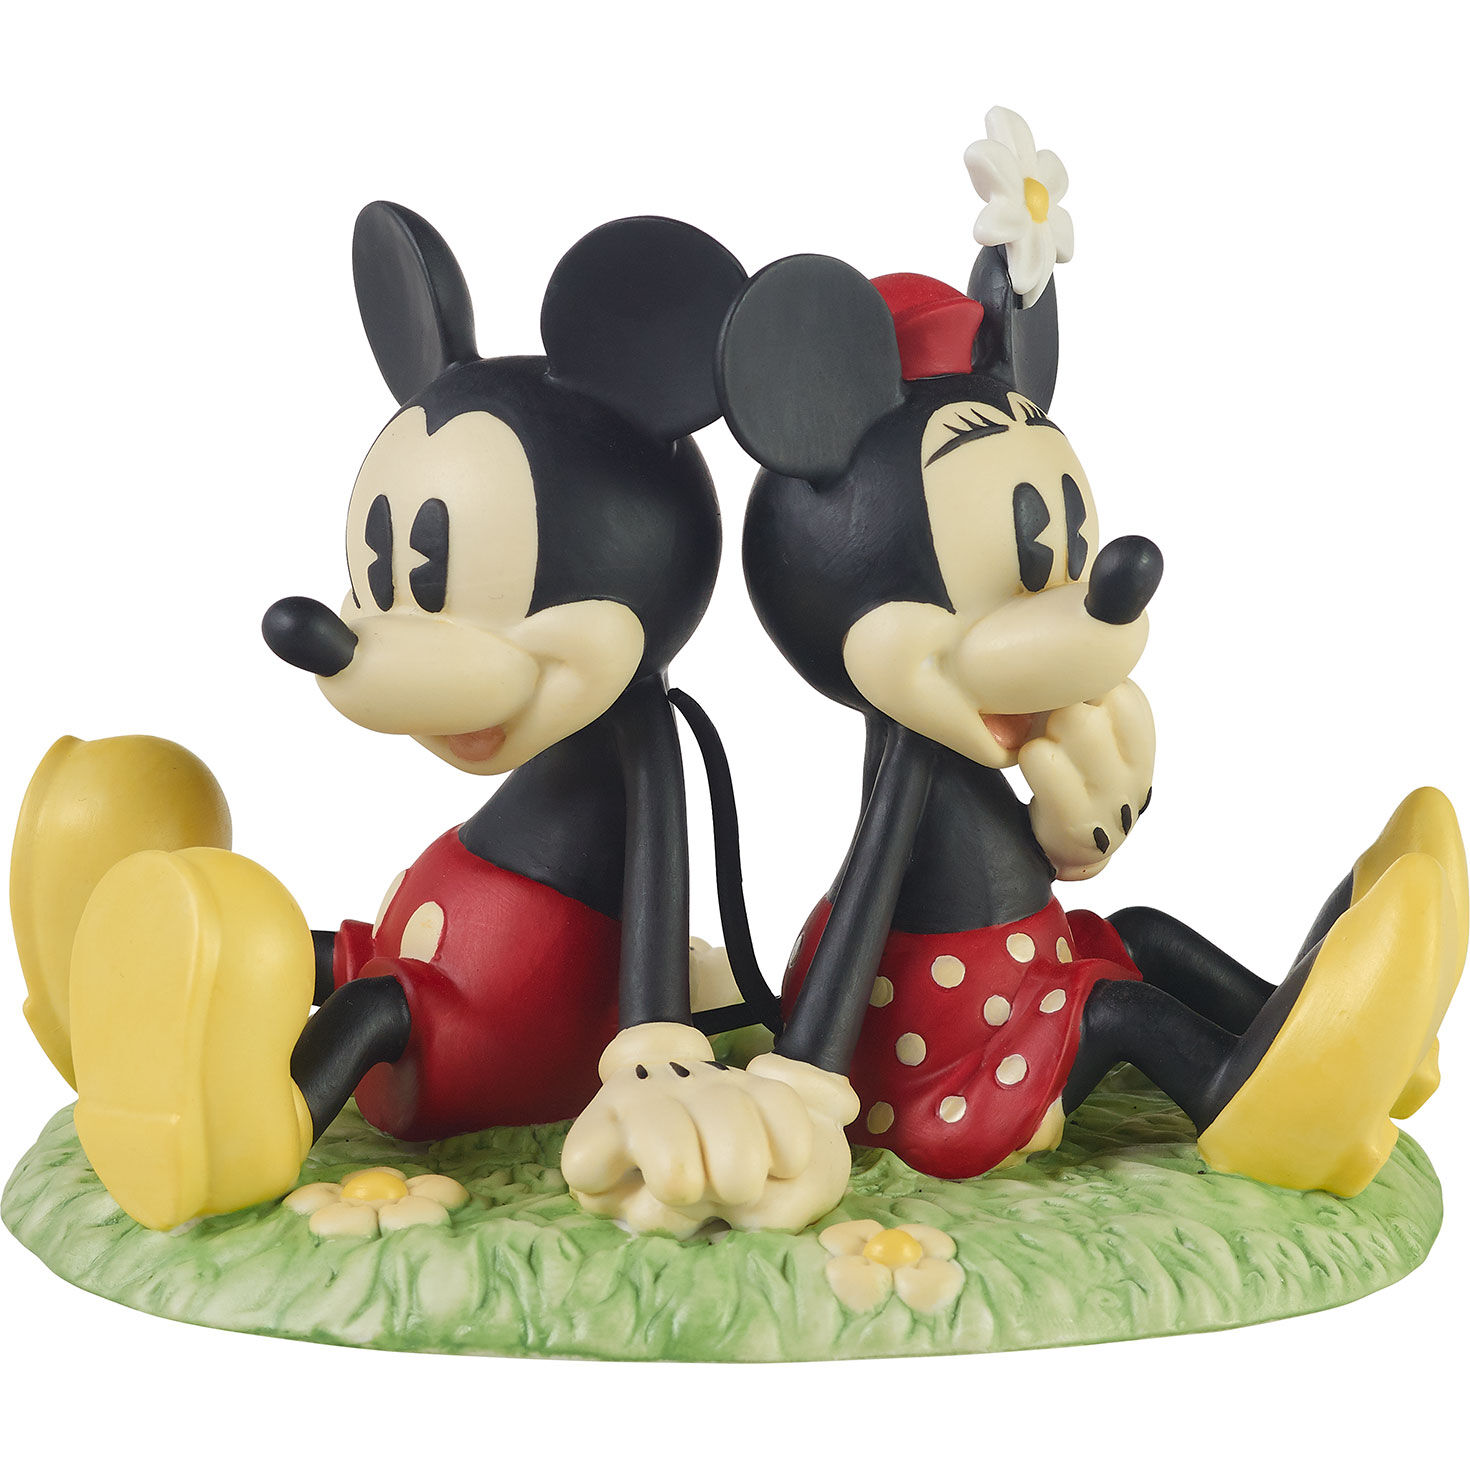 Precious Moments Disney Mickey Mouse and Minnie Mouse Holding Hands Figurine, 3.9" for only USD 89.99 | Hallmark